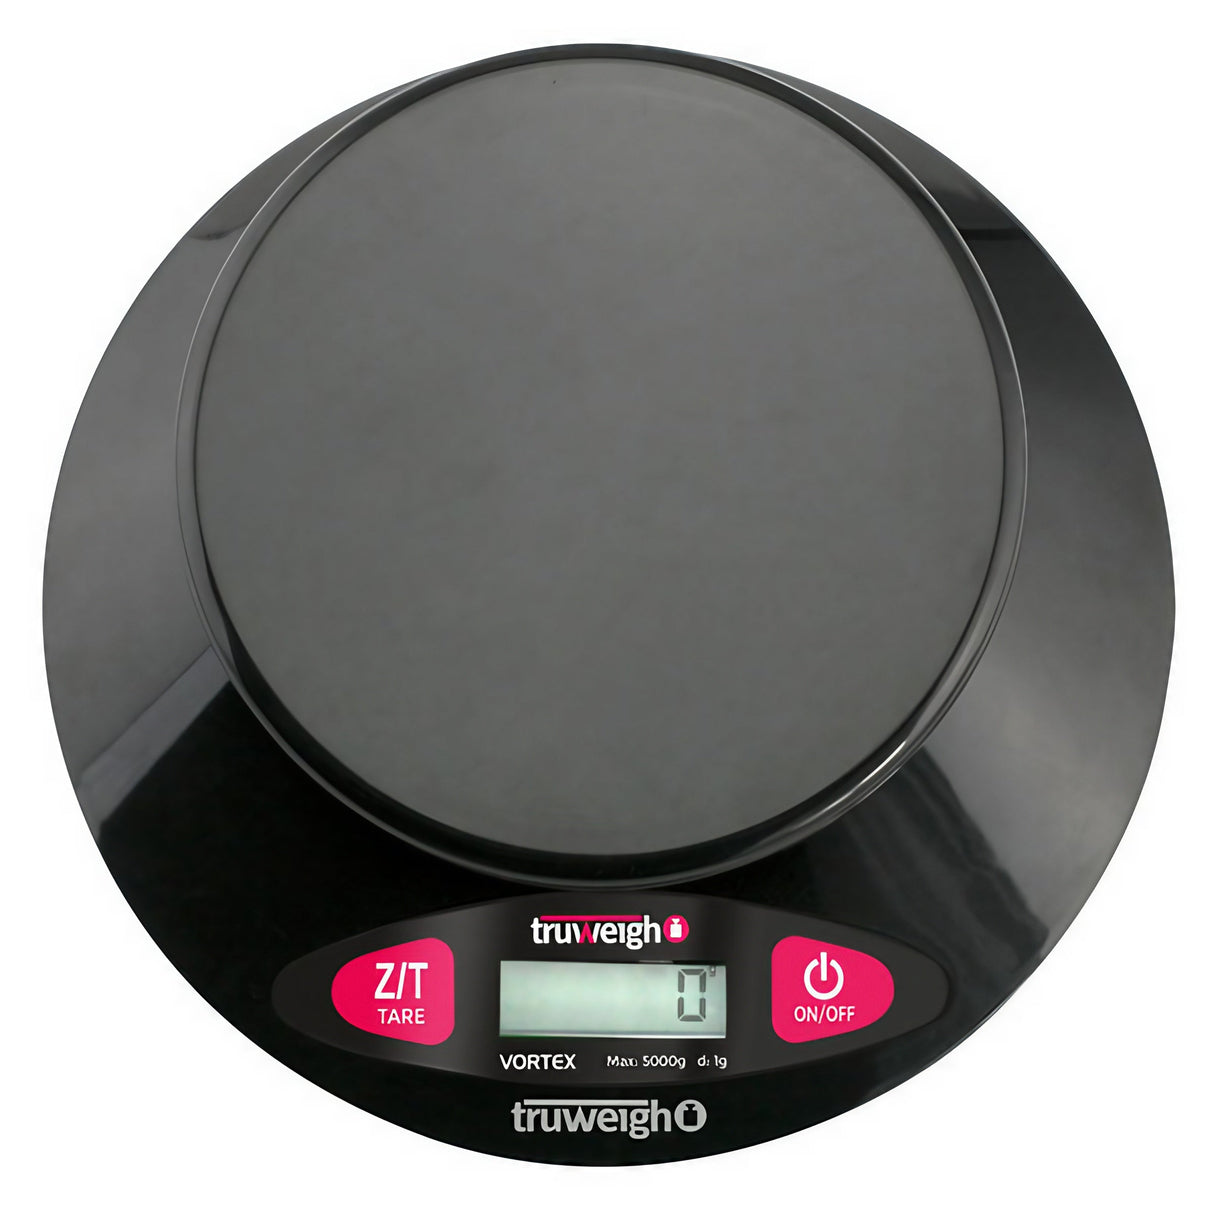 Truweigh Vortex Digital Bowl Scale in black, top view showing LCD and control buttons